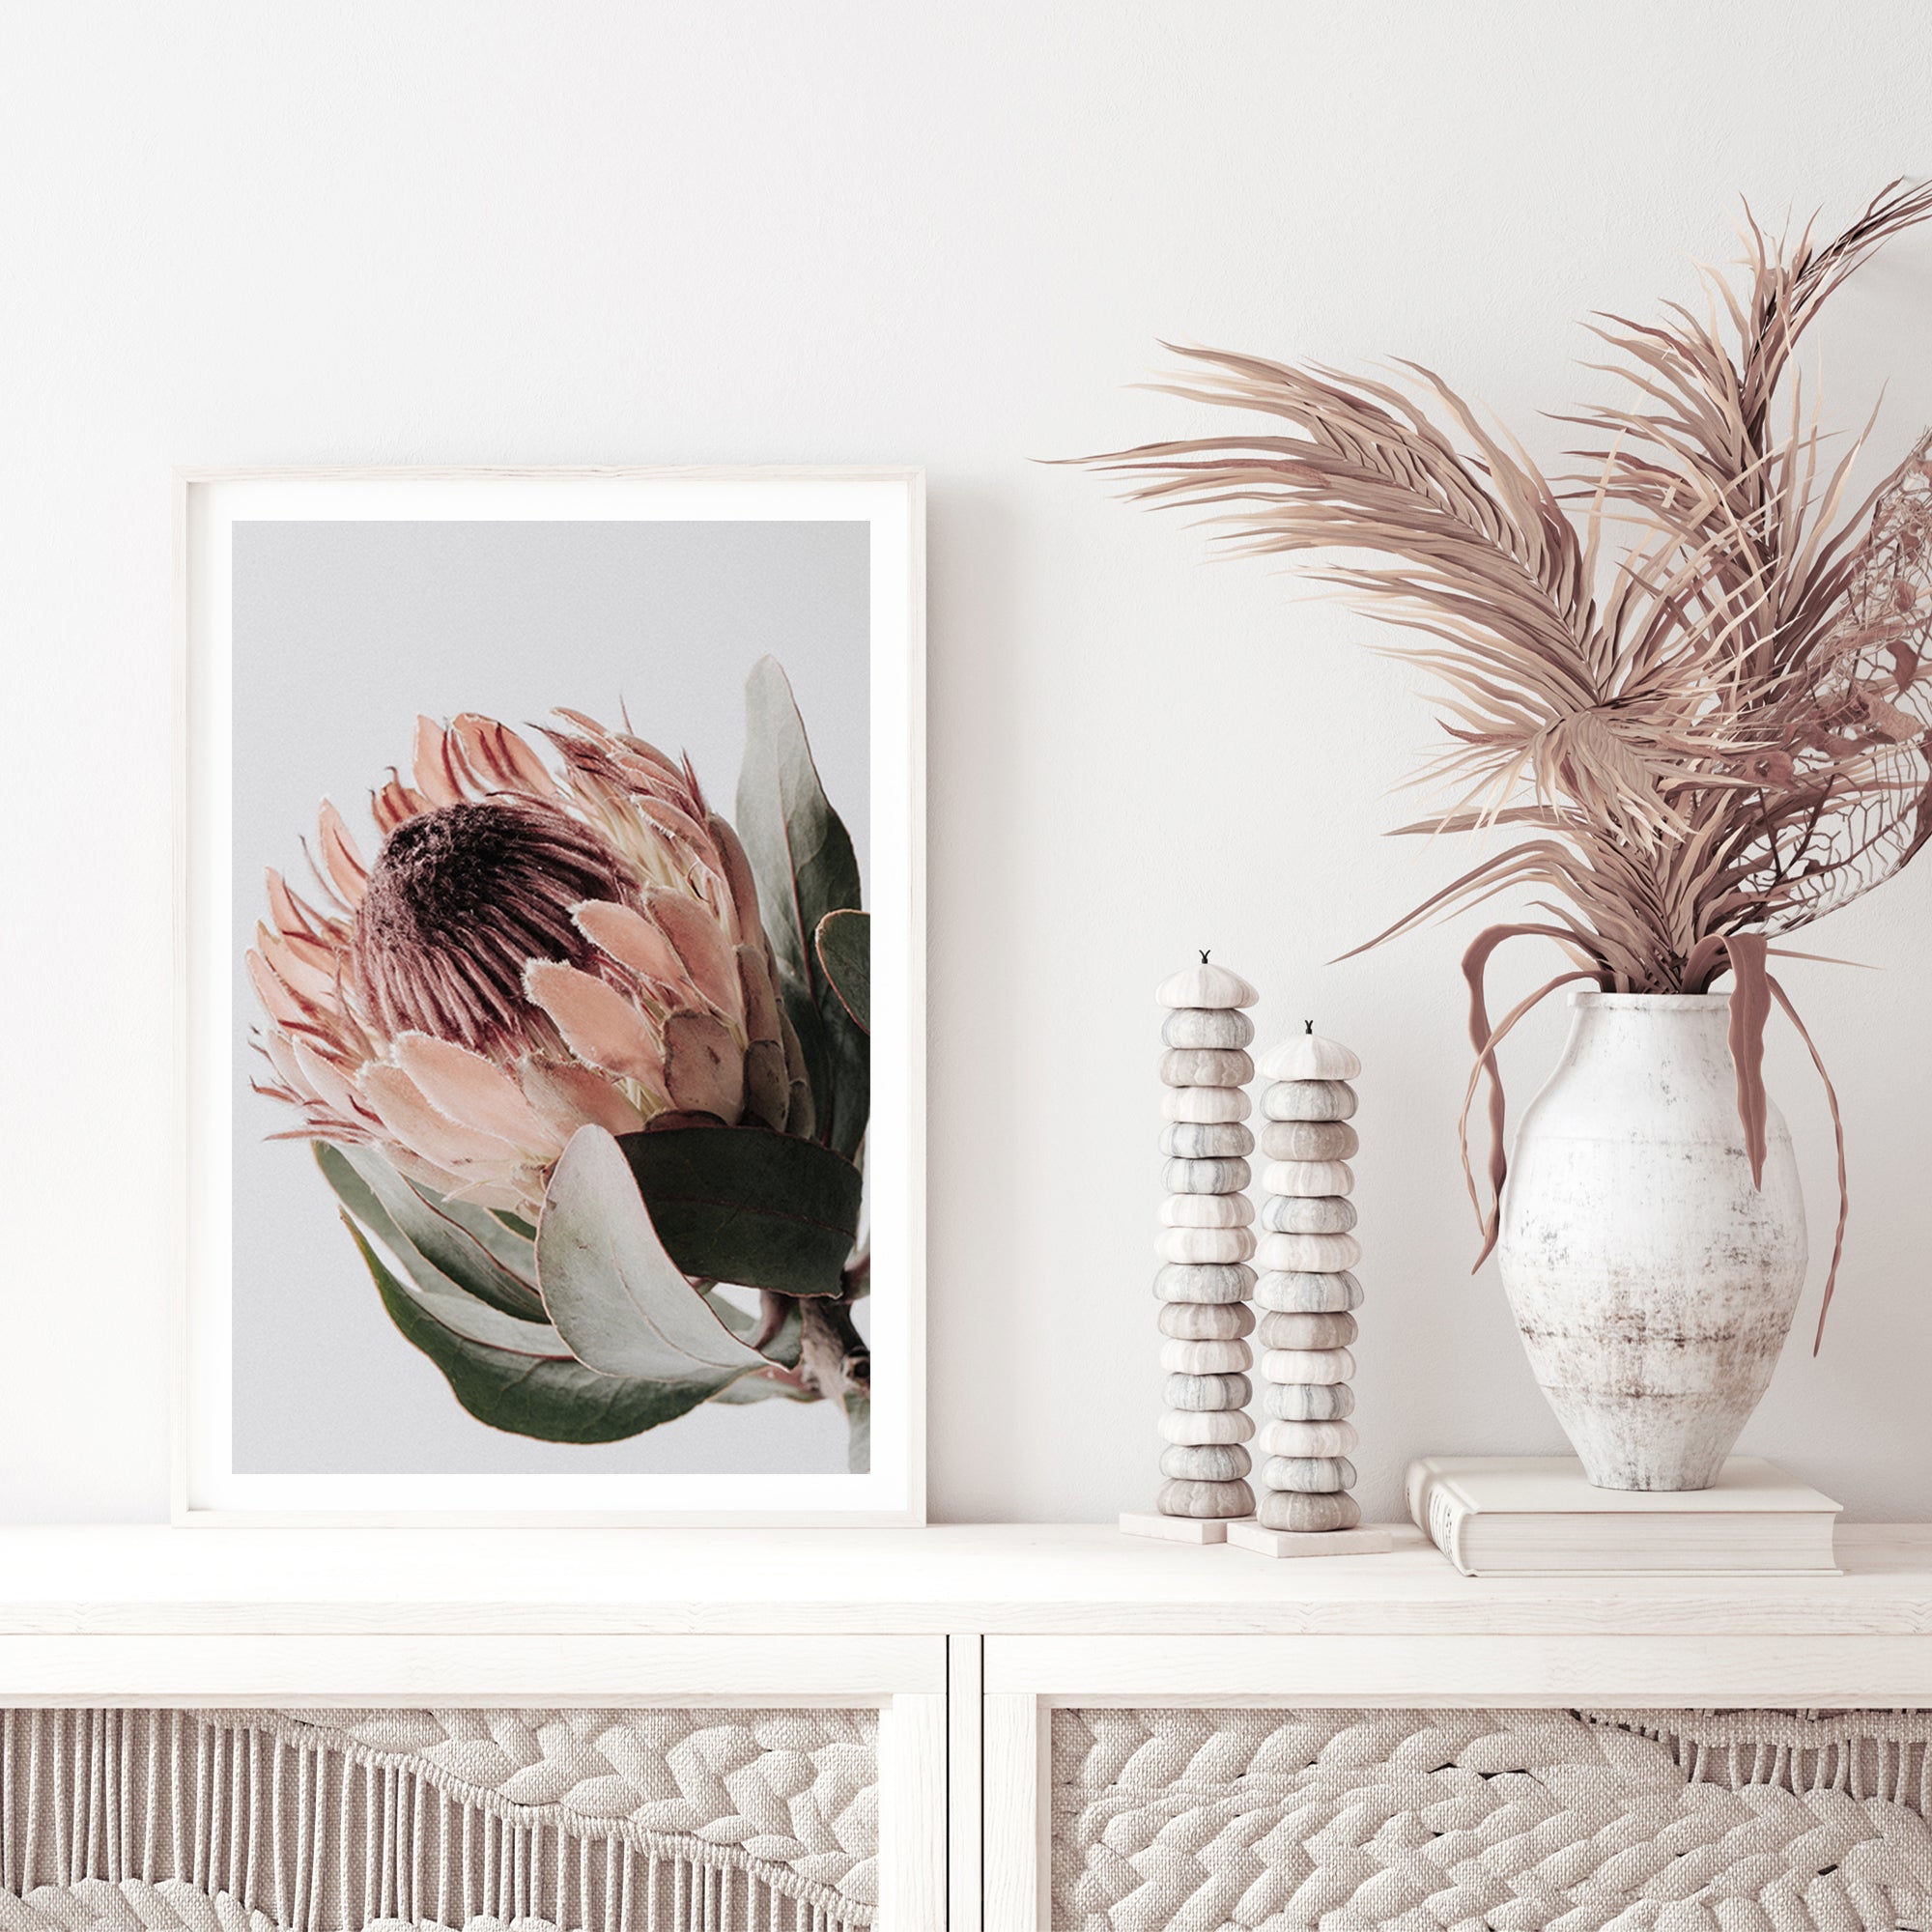 A wall art print featuring one beautiful peach protea flower with green leaves in muted tones, available unframed or framed.